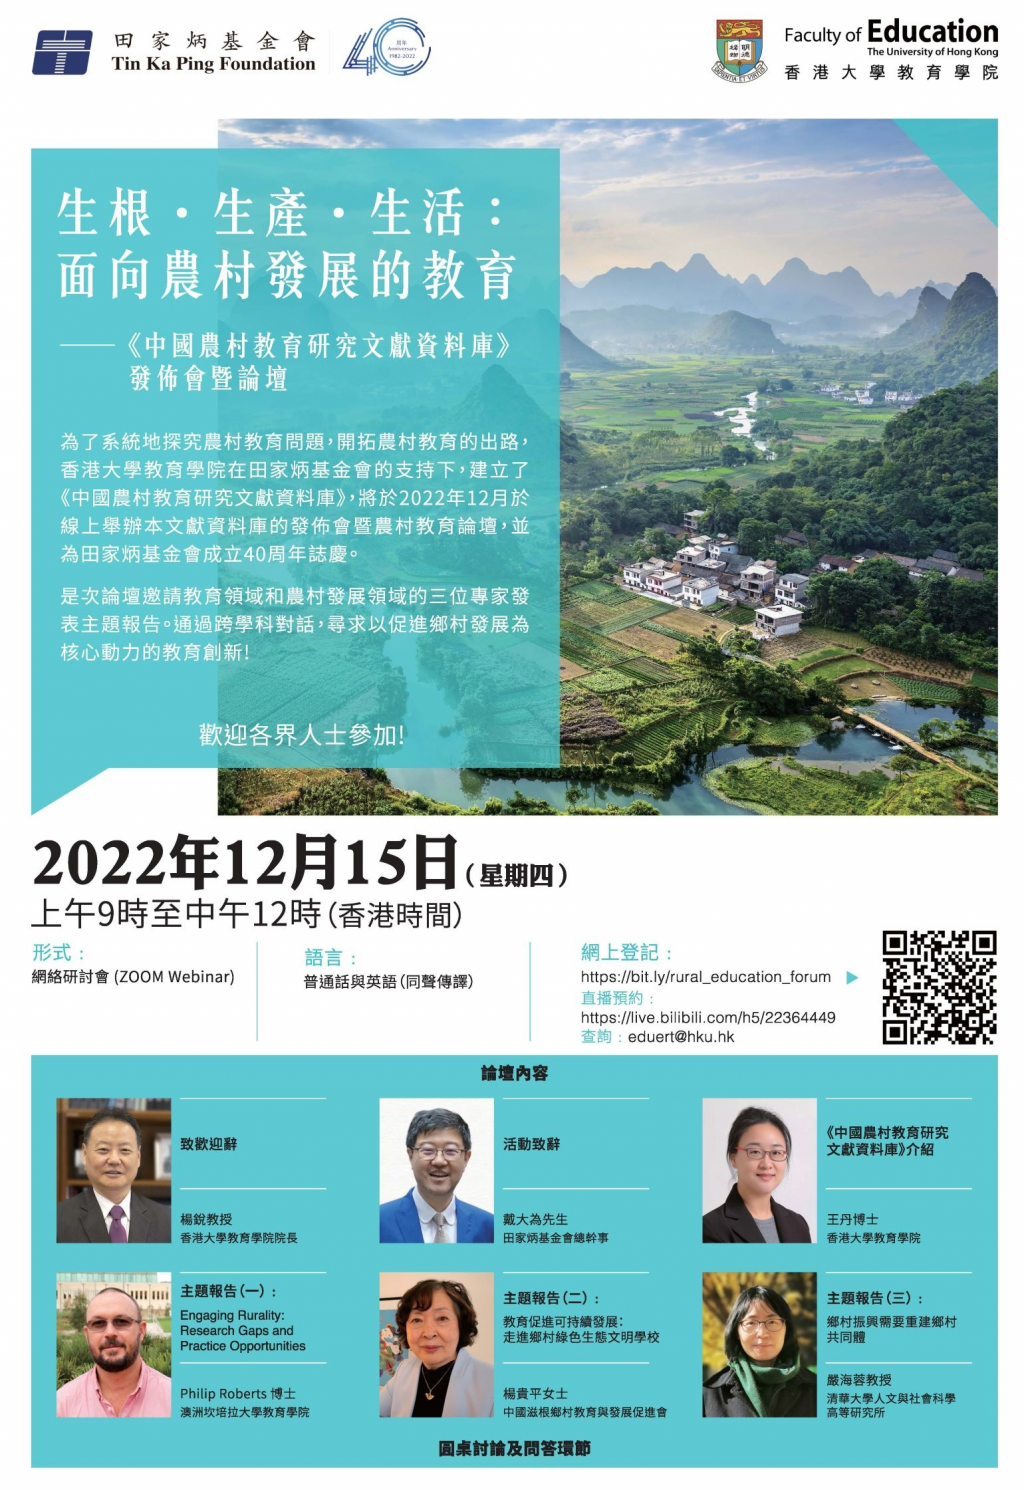 Land, Labour, and Life: Education for Rural Development – Launch Symposium: China Rural Education Literature